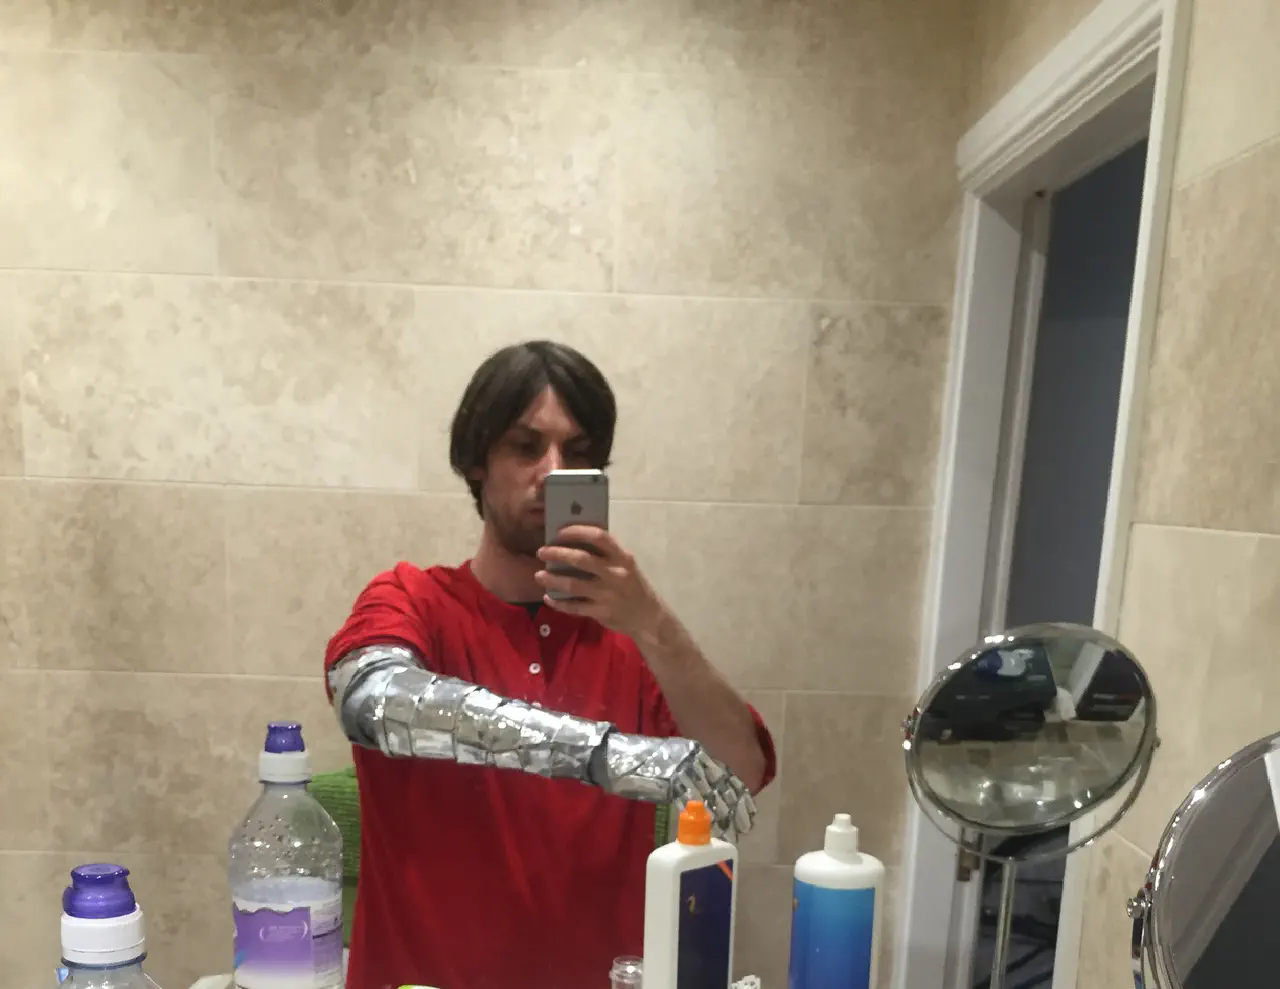 A stubbled individual in a read shirt taking a selfie in a large mirror. They have a shiny silver mechanical arm